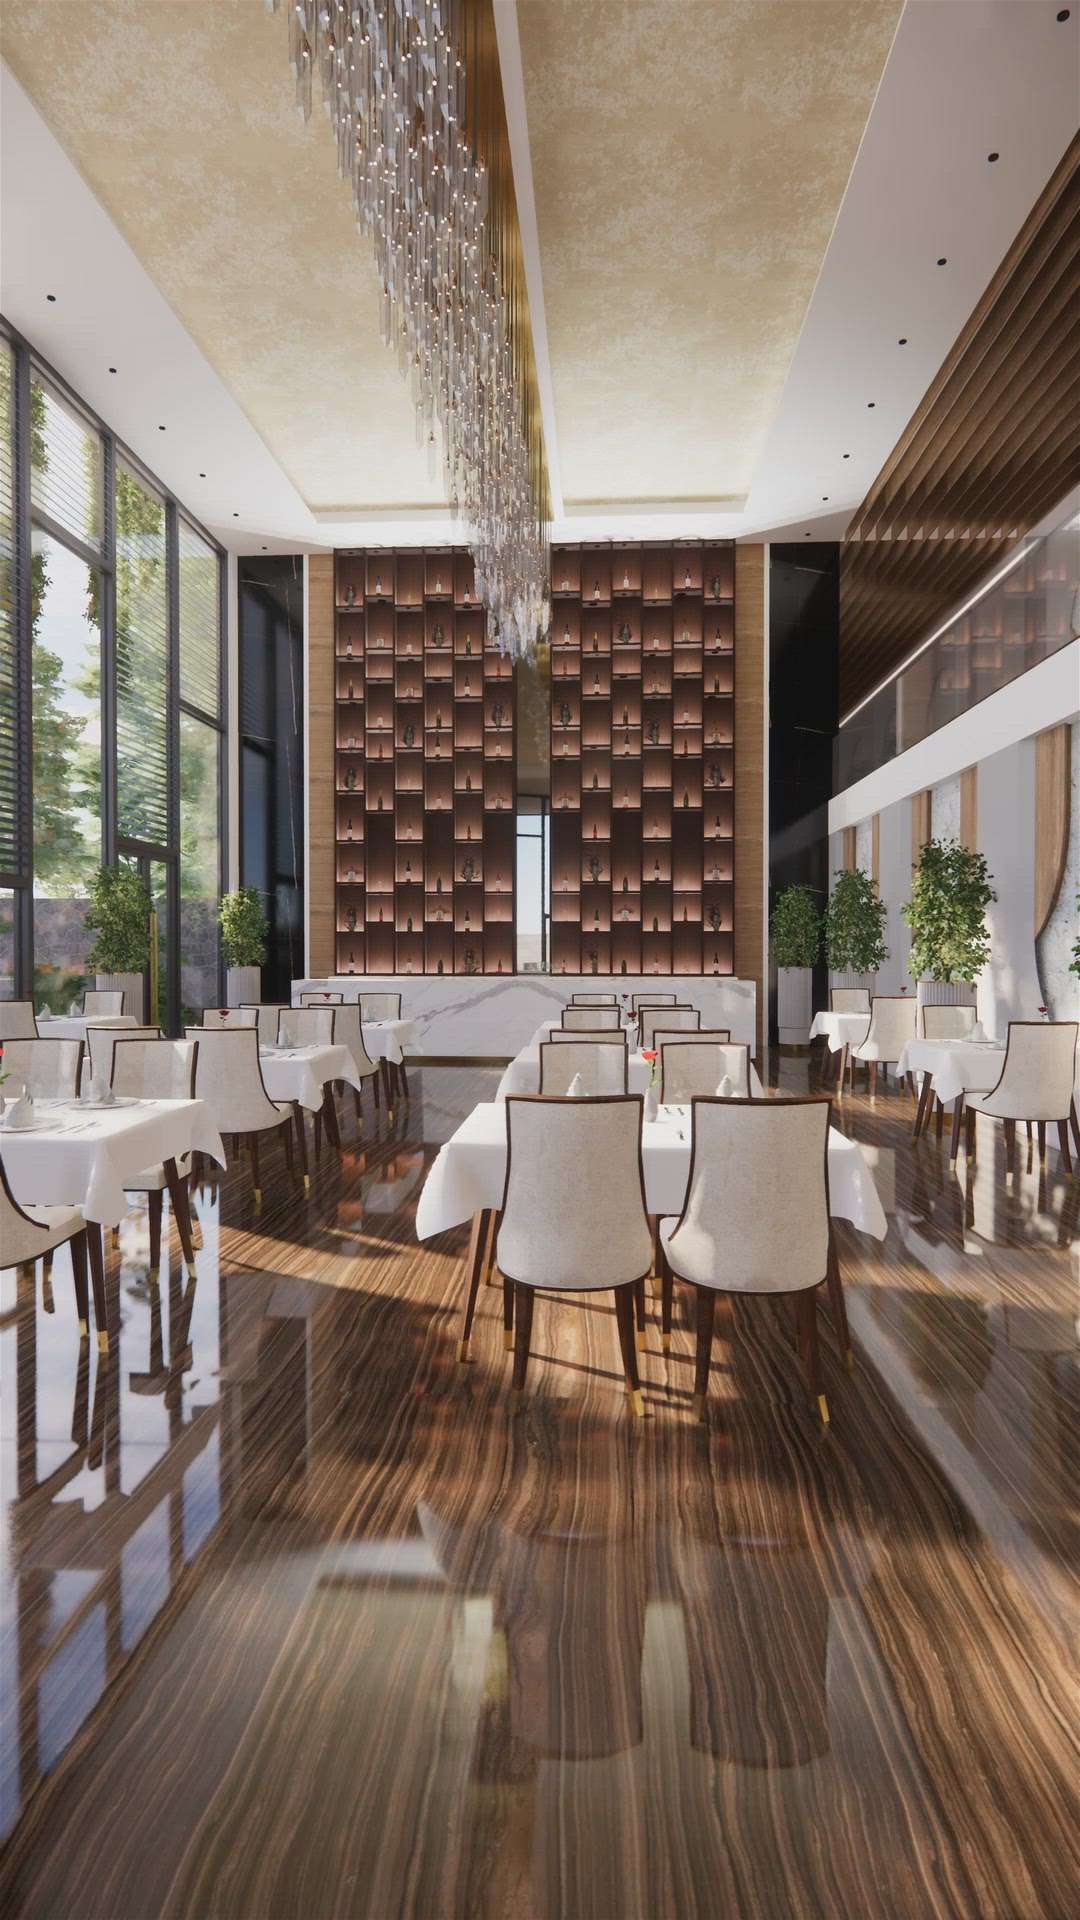 Elevate your dining experience with Dwellcon's luxurious restaurant design. Our expert team has created a space that seamlessly blends style and comfort, providing the perfect ambiance for a memorable meal.

dwellcon.in
Live The Experience

#dwellcon #livetheexperience #finerestaurant #luxurydining #interiordesign #architecture #designinspiration #elegantinteriors #culinaryart #foodiegram #gastronomy #gastronomia #gourmetfood #foodstagram #restaurantdesign #hospitalitydesign #luxurylifestyle #diningexperience #diningroomdecor #homedecor #interiorinspo #delhi #gurgaon #noida #chandigarh #gurugram